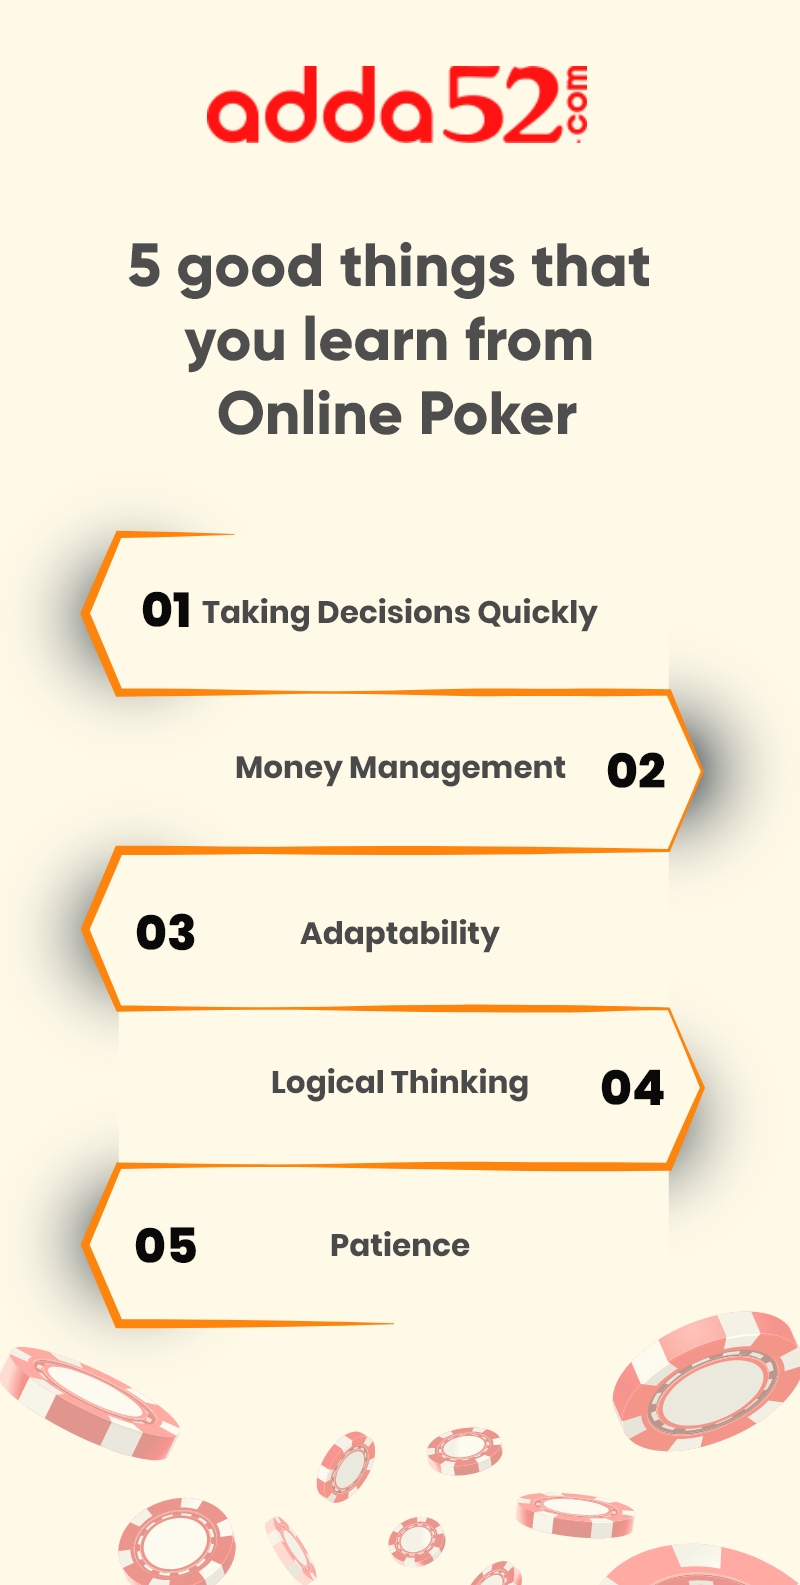 5 good things that you learn from Online Poker